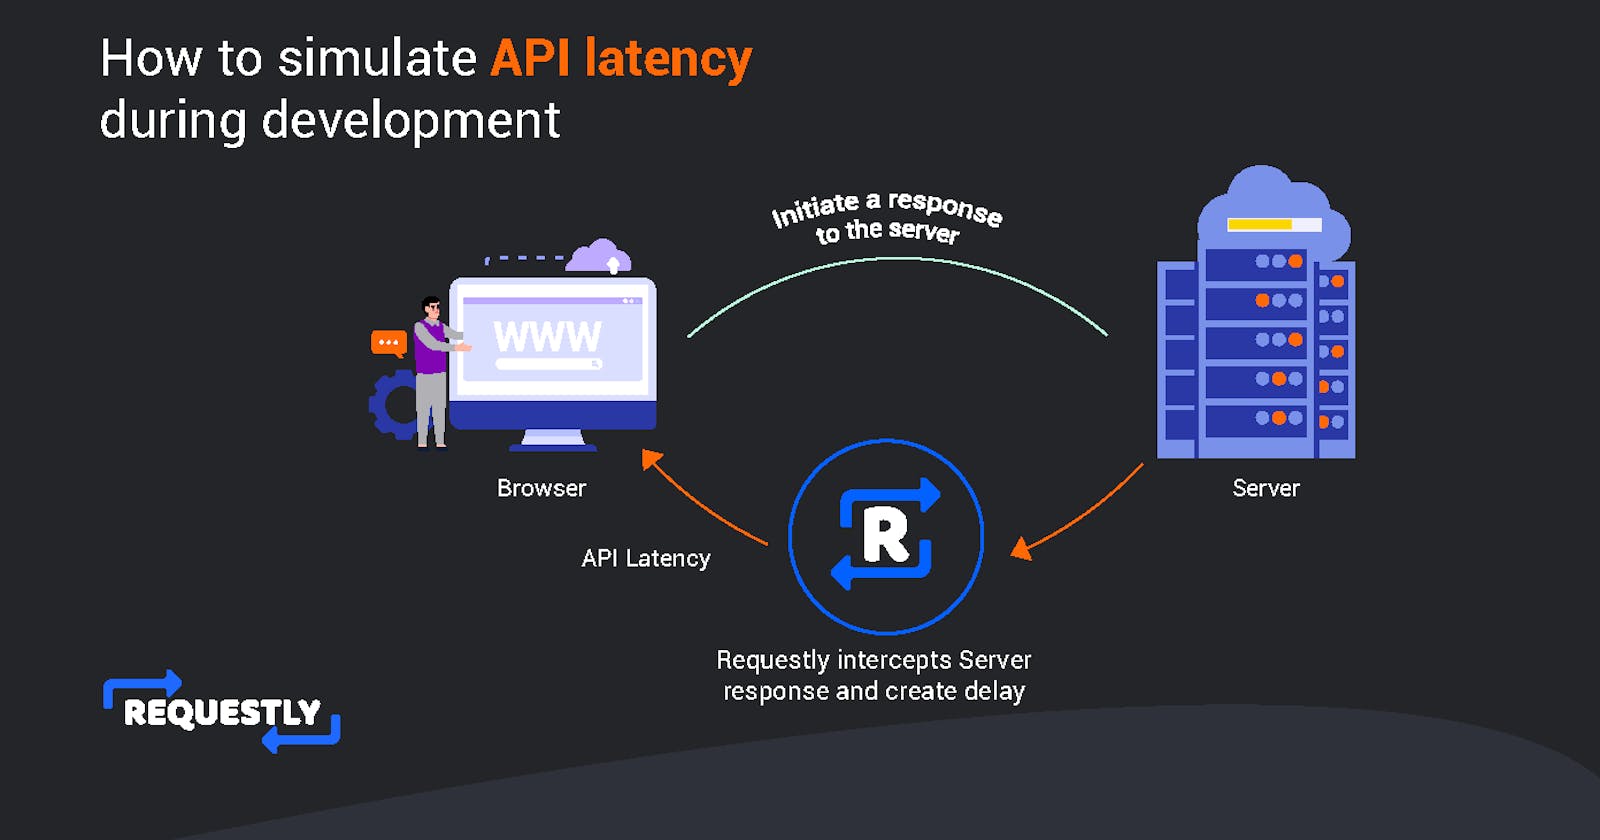 How to simulate API latency during development